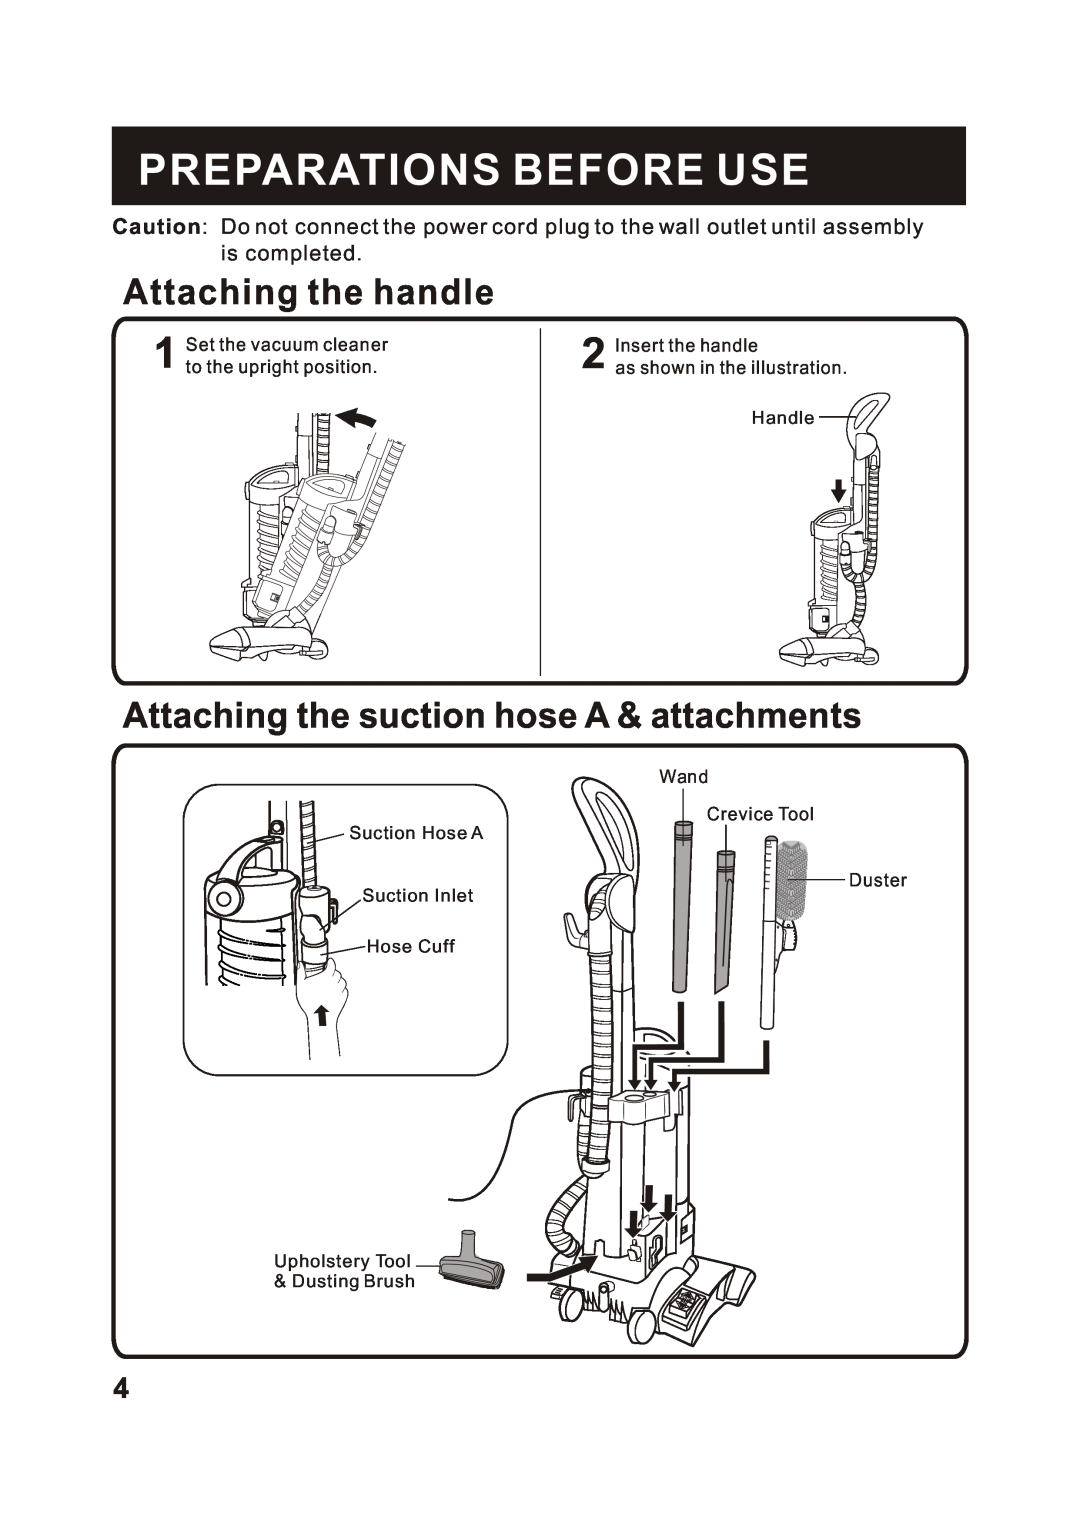 Fantom Vacuum FM788HC Preparations Before Use, Attaching the handle, Attaching the suction hose A & attachments, Floor Ugr 